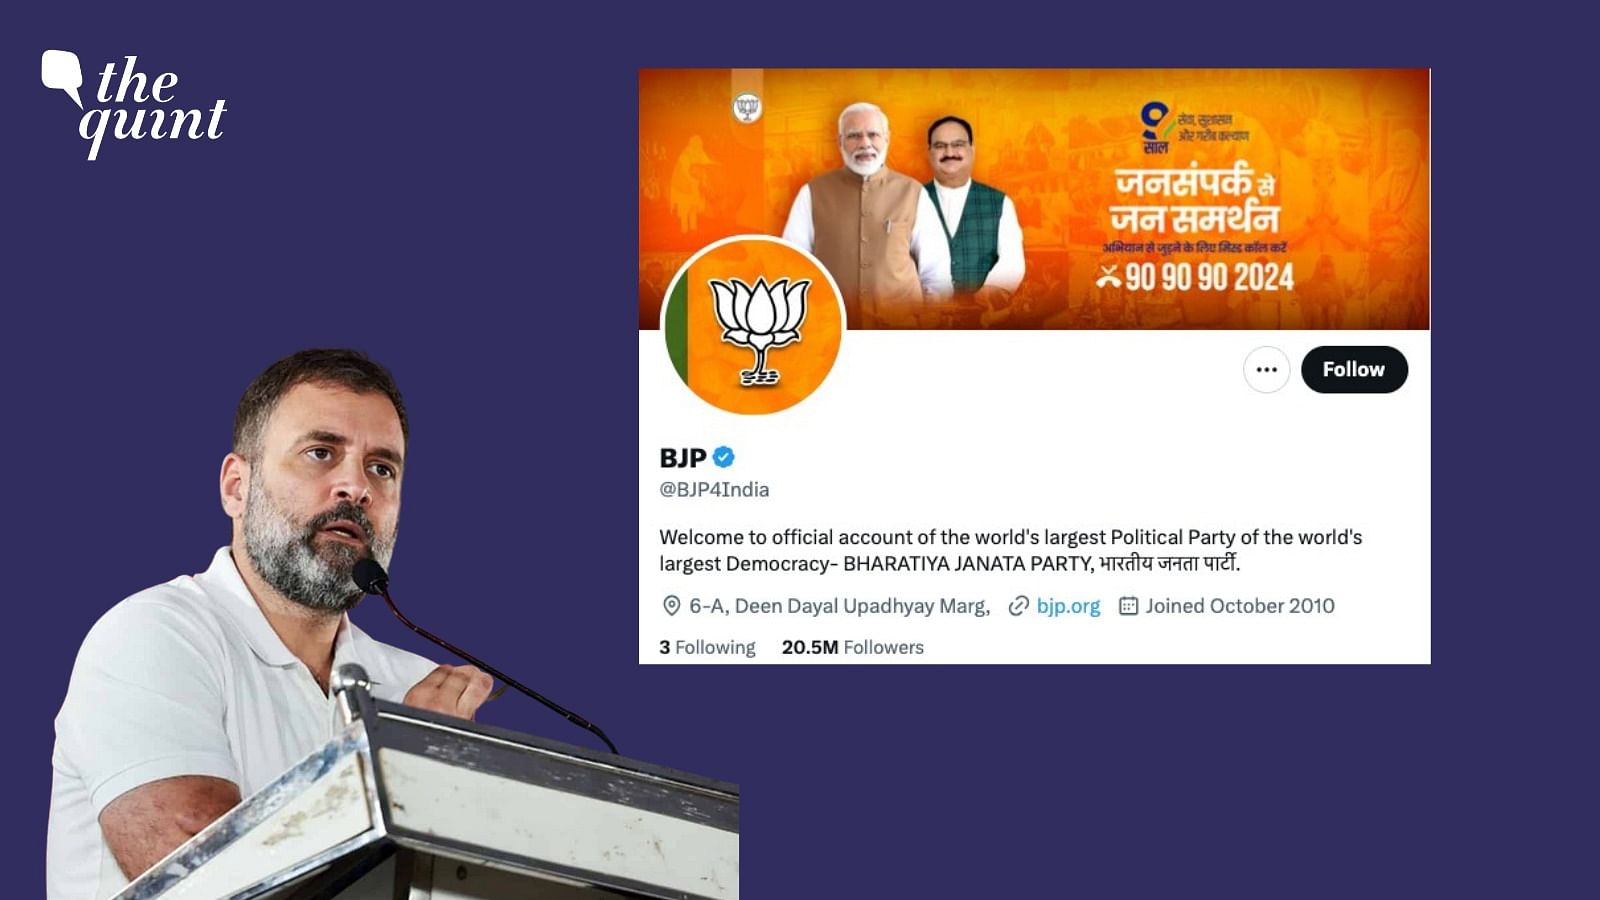 <div class="paragraphs"><p>Screenshots of a tweet by the Bharatiya Janata Party (BJP) recently went viral on social media, evoking sharp responses online.</p></div>